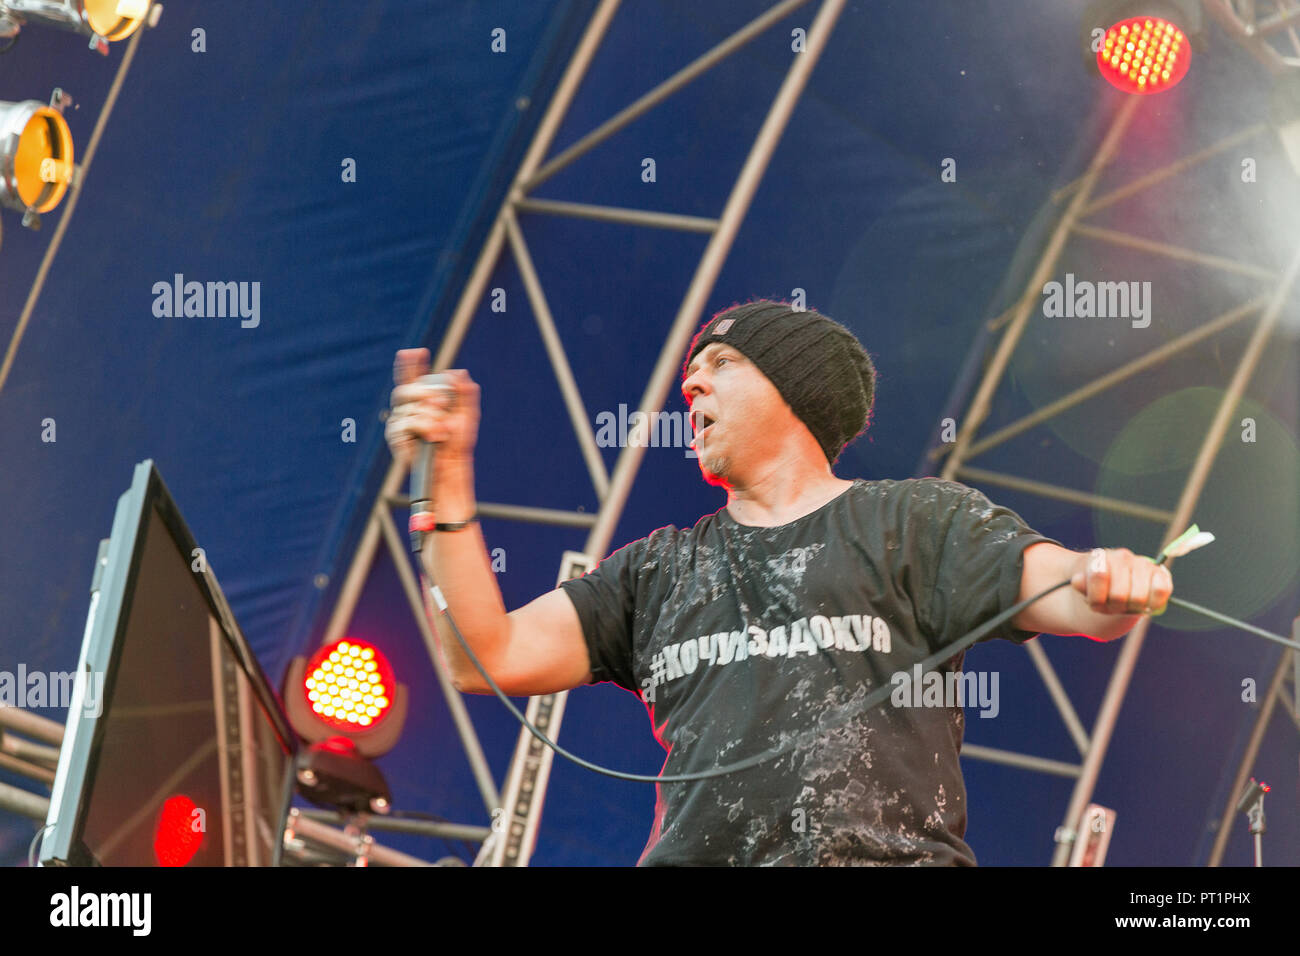 KIEV, UKRAINE - JULY 05, 2018: Ukrainian hip hop band TNMK and Fozzi, lead singer and frontman performs live at the Atlas Weekend Festival in National Stock Photo